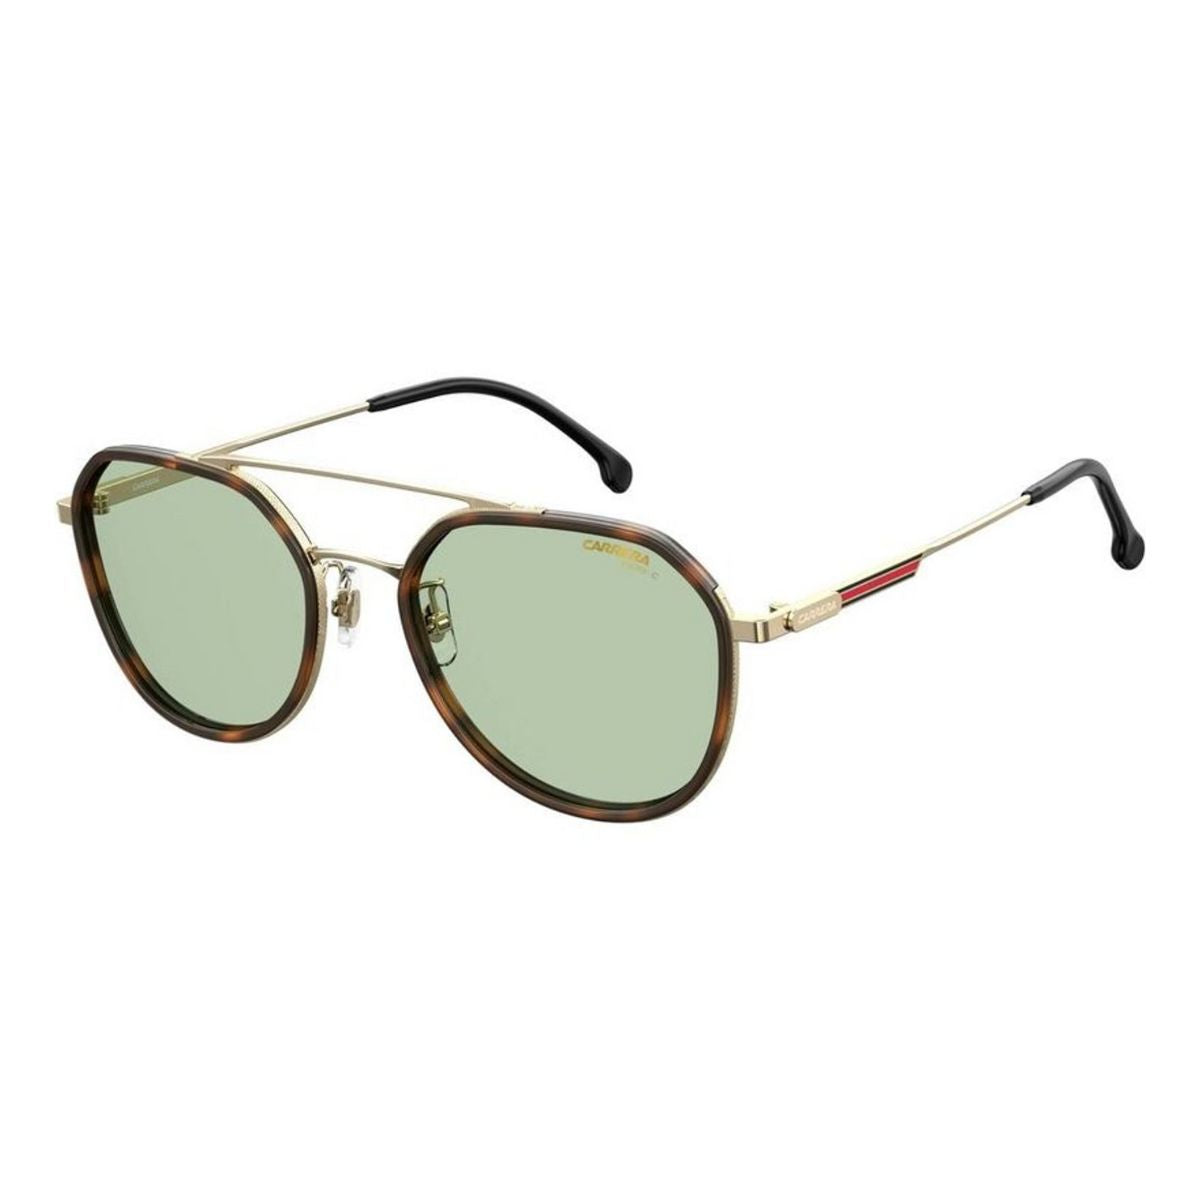 "Buy Gold Rounded Sunglasses For Both Mens And Womens At Optorium"